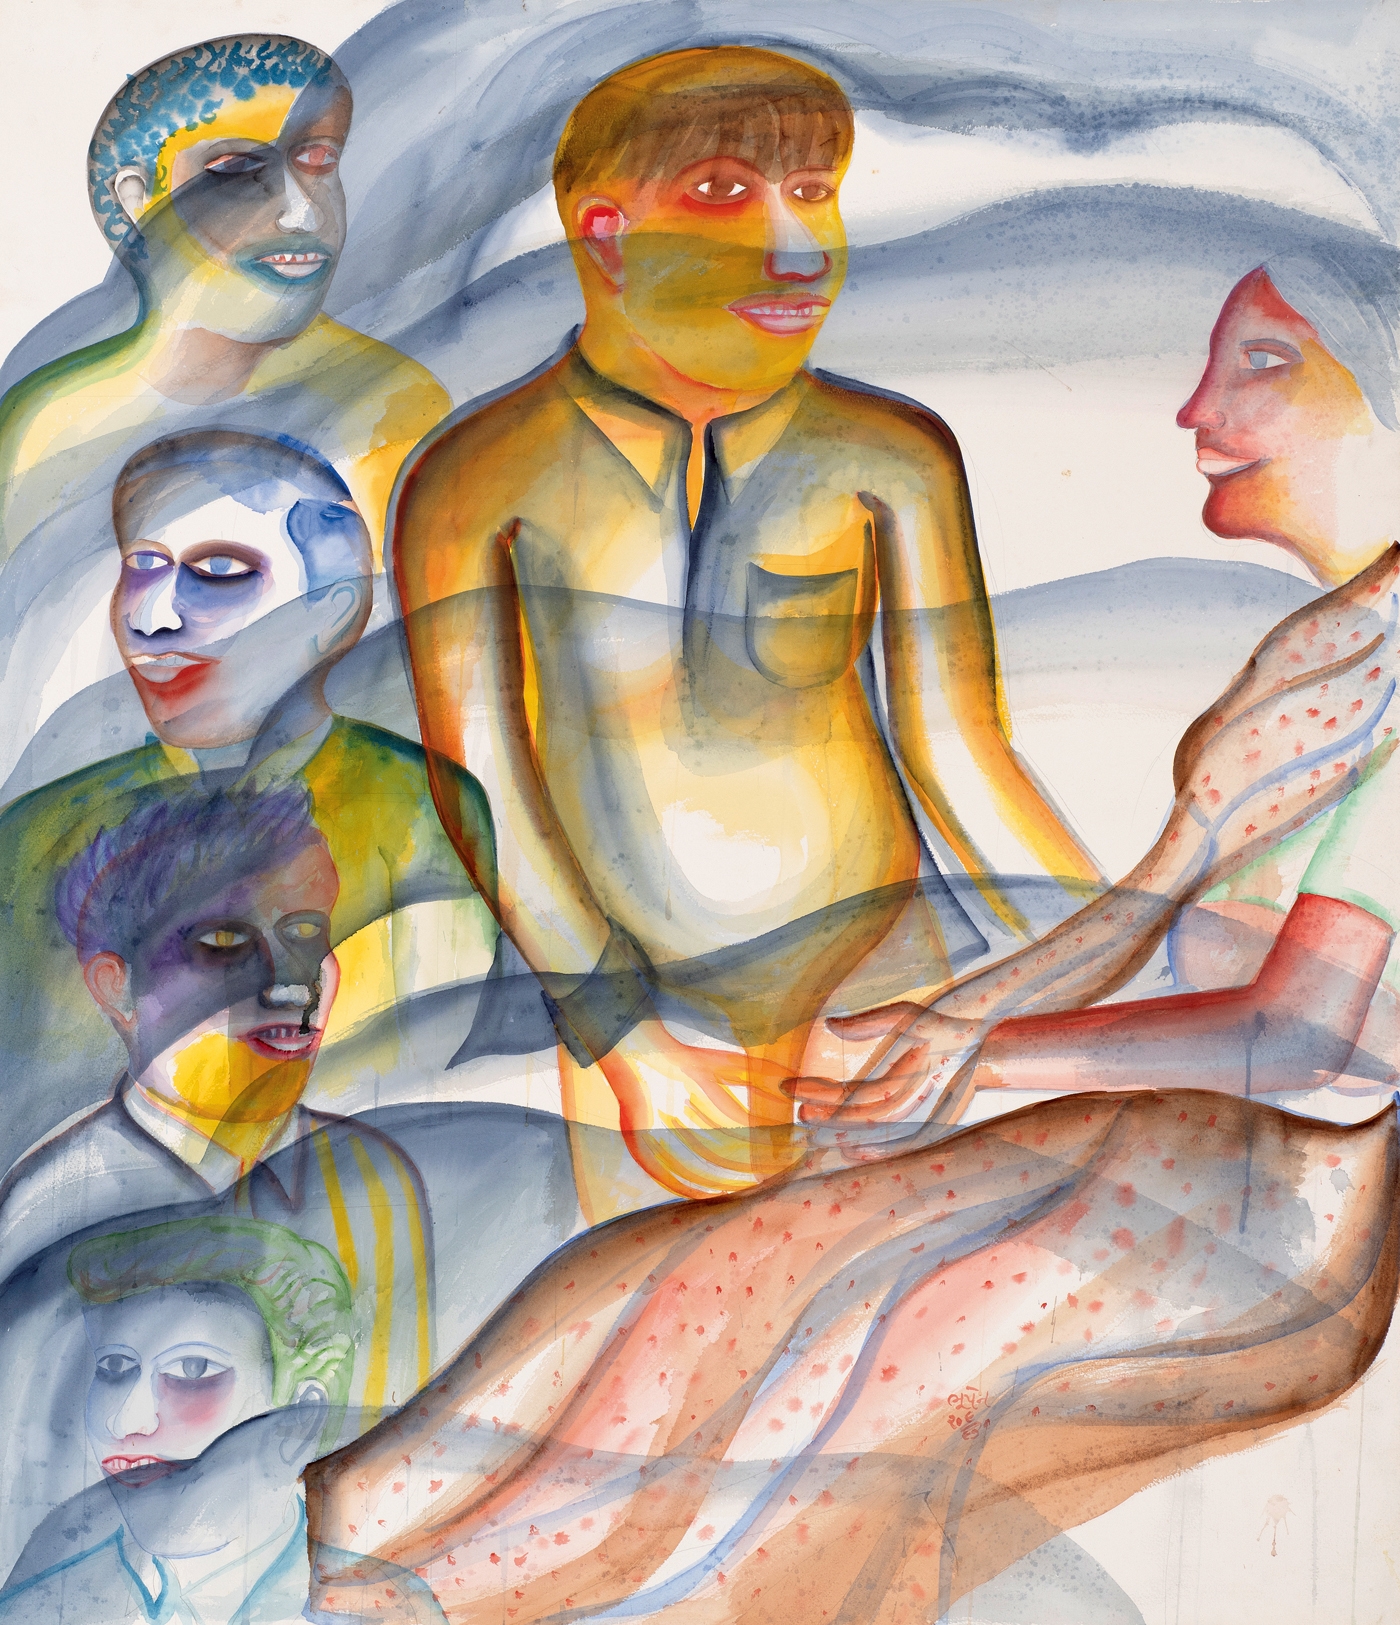 Artwork by Bhupen Khakhar, Untitled, Made of Pencil and watercolour on paper